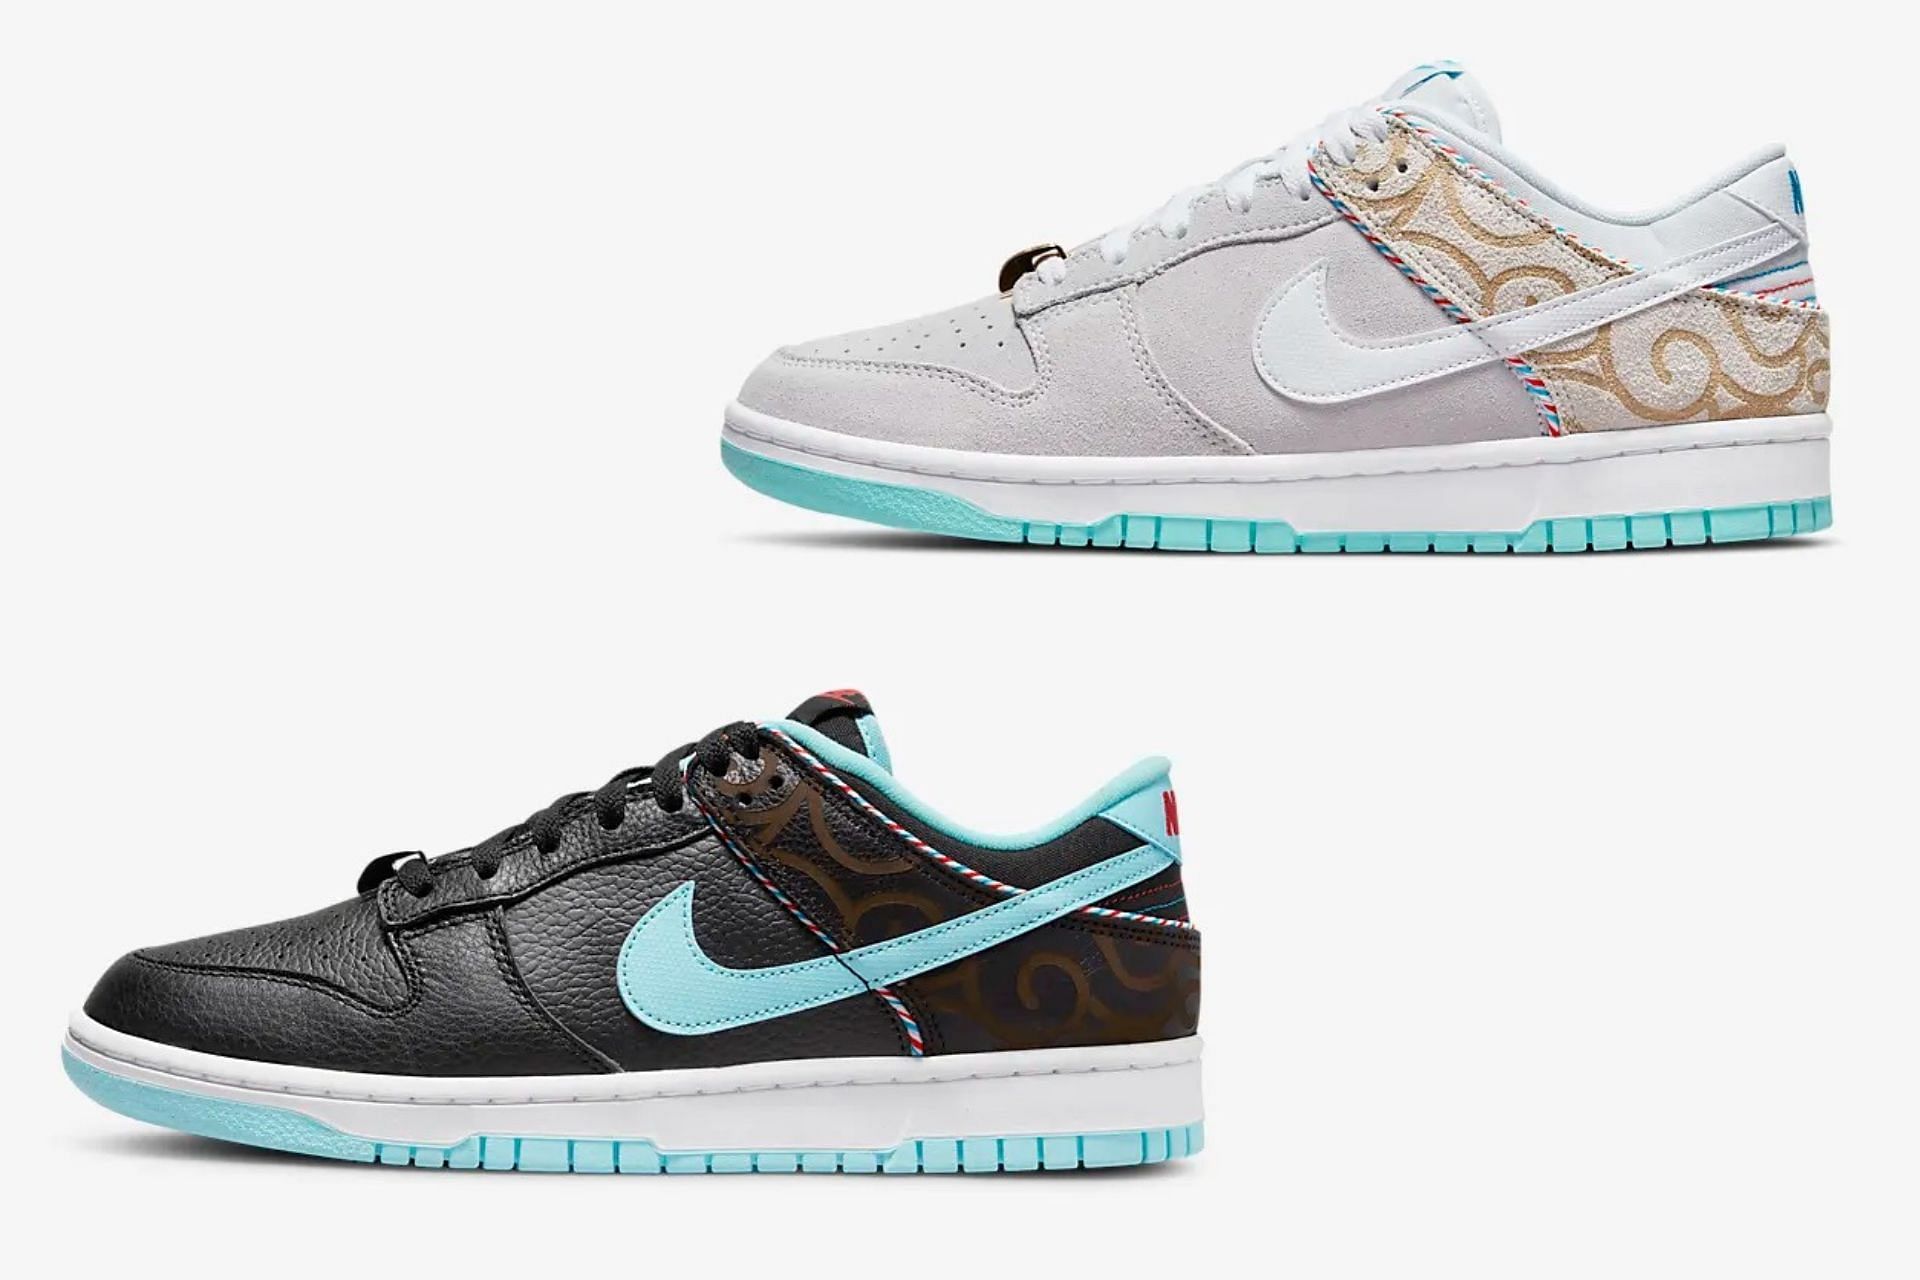 Take a closer look at the white and black colorways (Image via Nike)